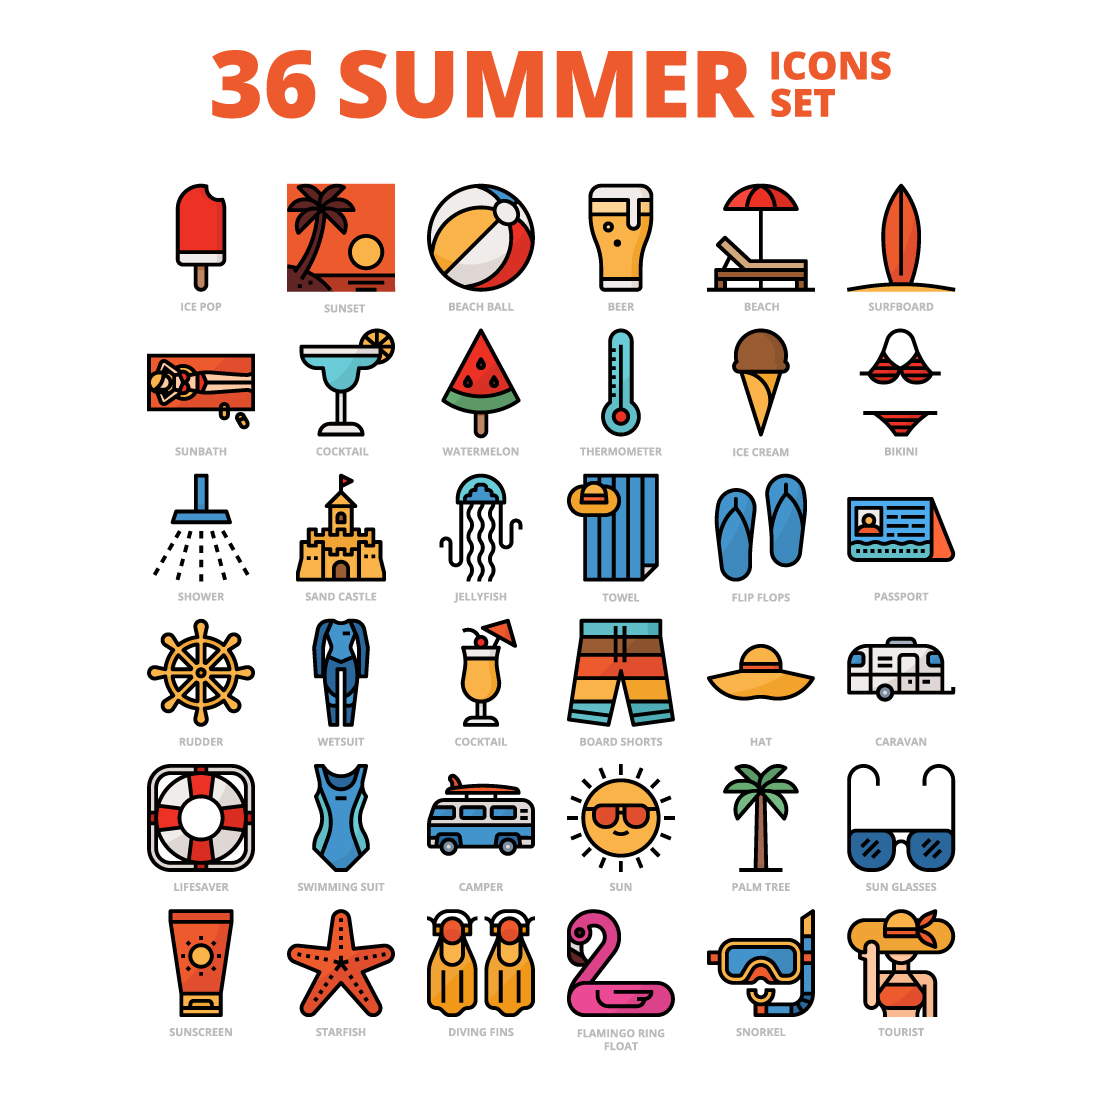 36 Summer Icons Set x 4 Styles cover image.